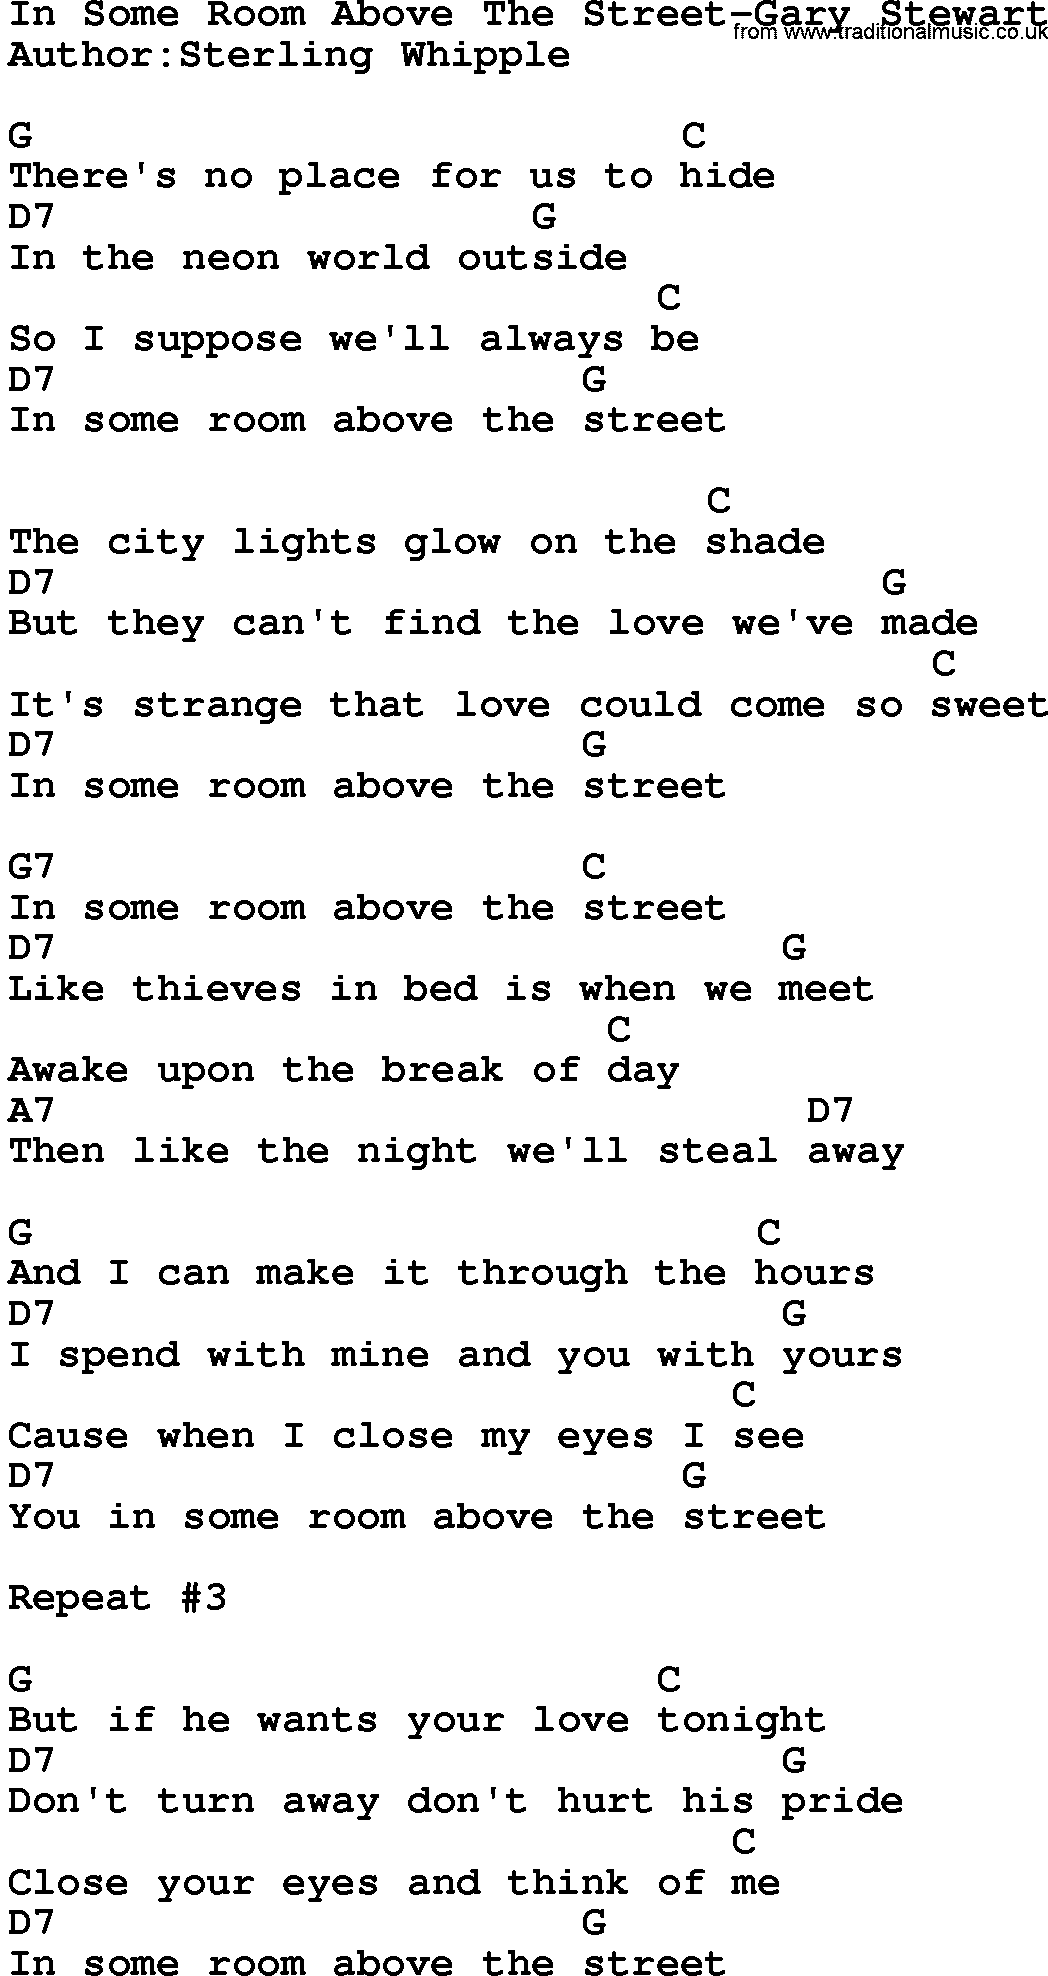 Country music song: In Some Room Above The Street-Gary Stewart lyrics and chords